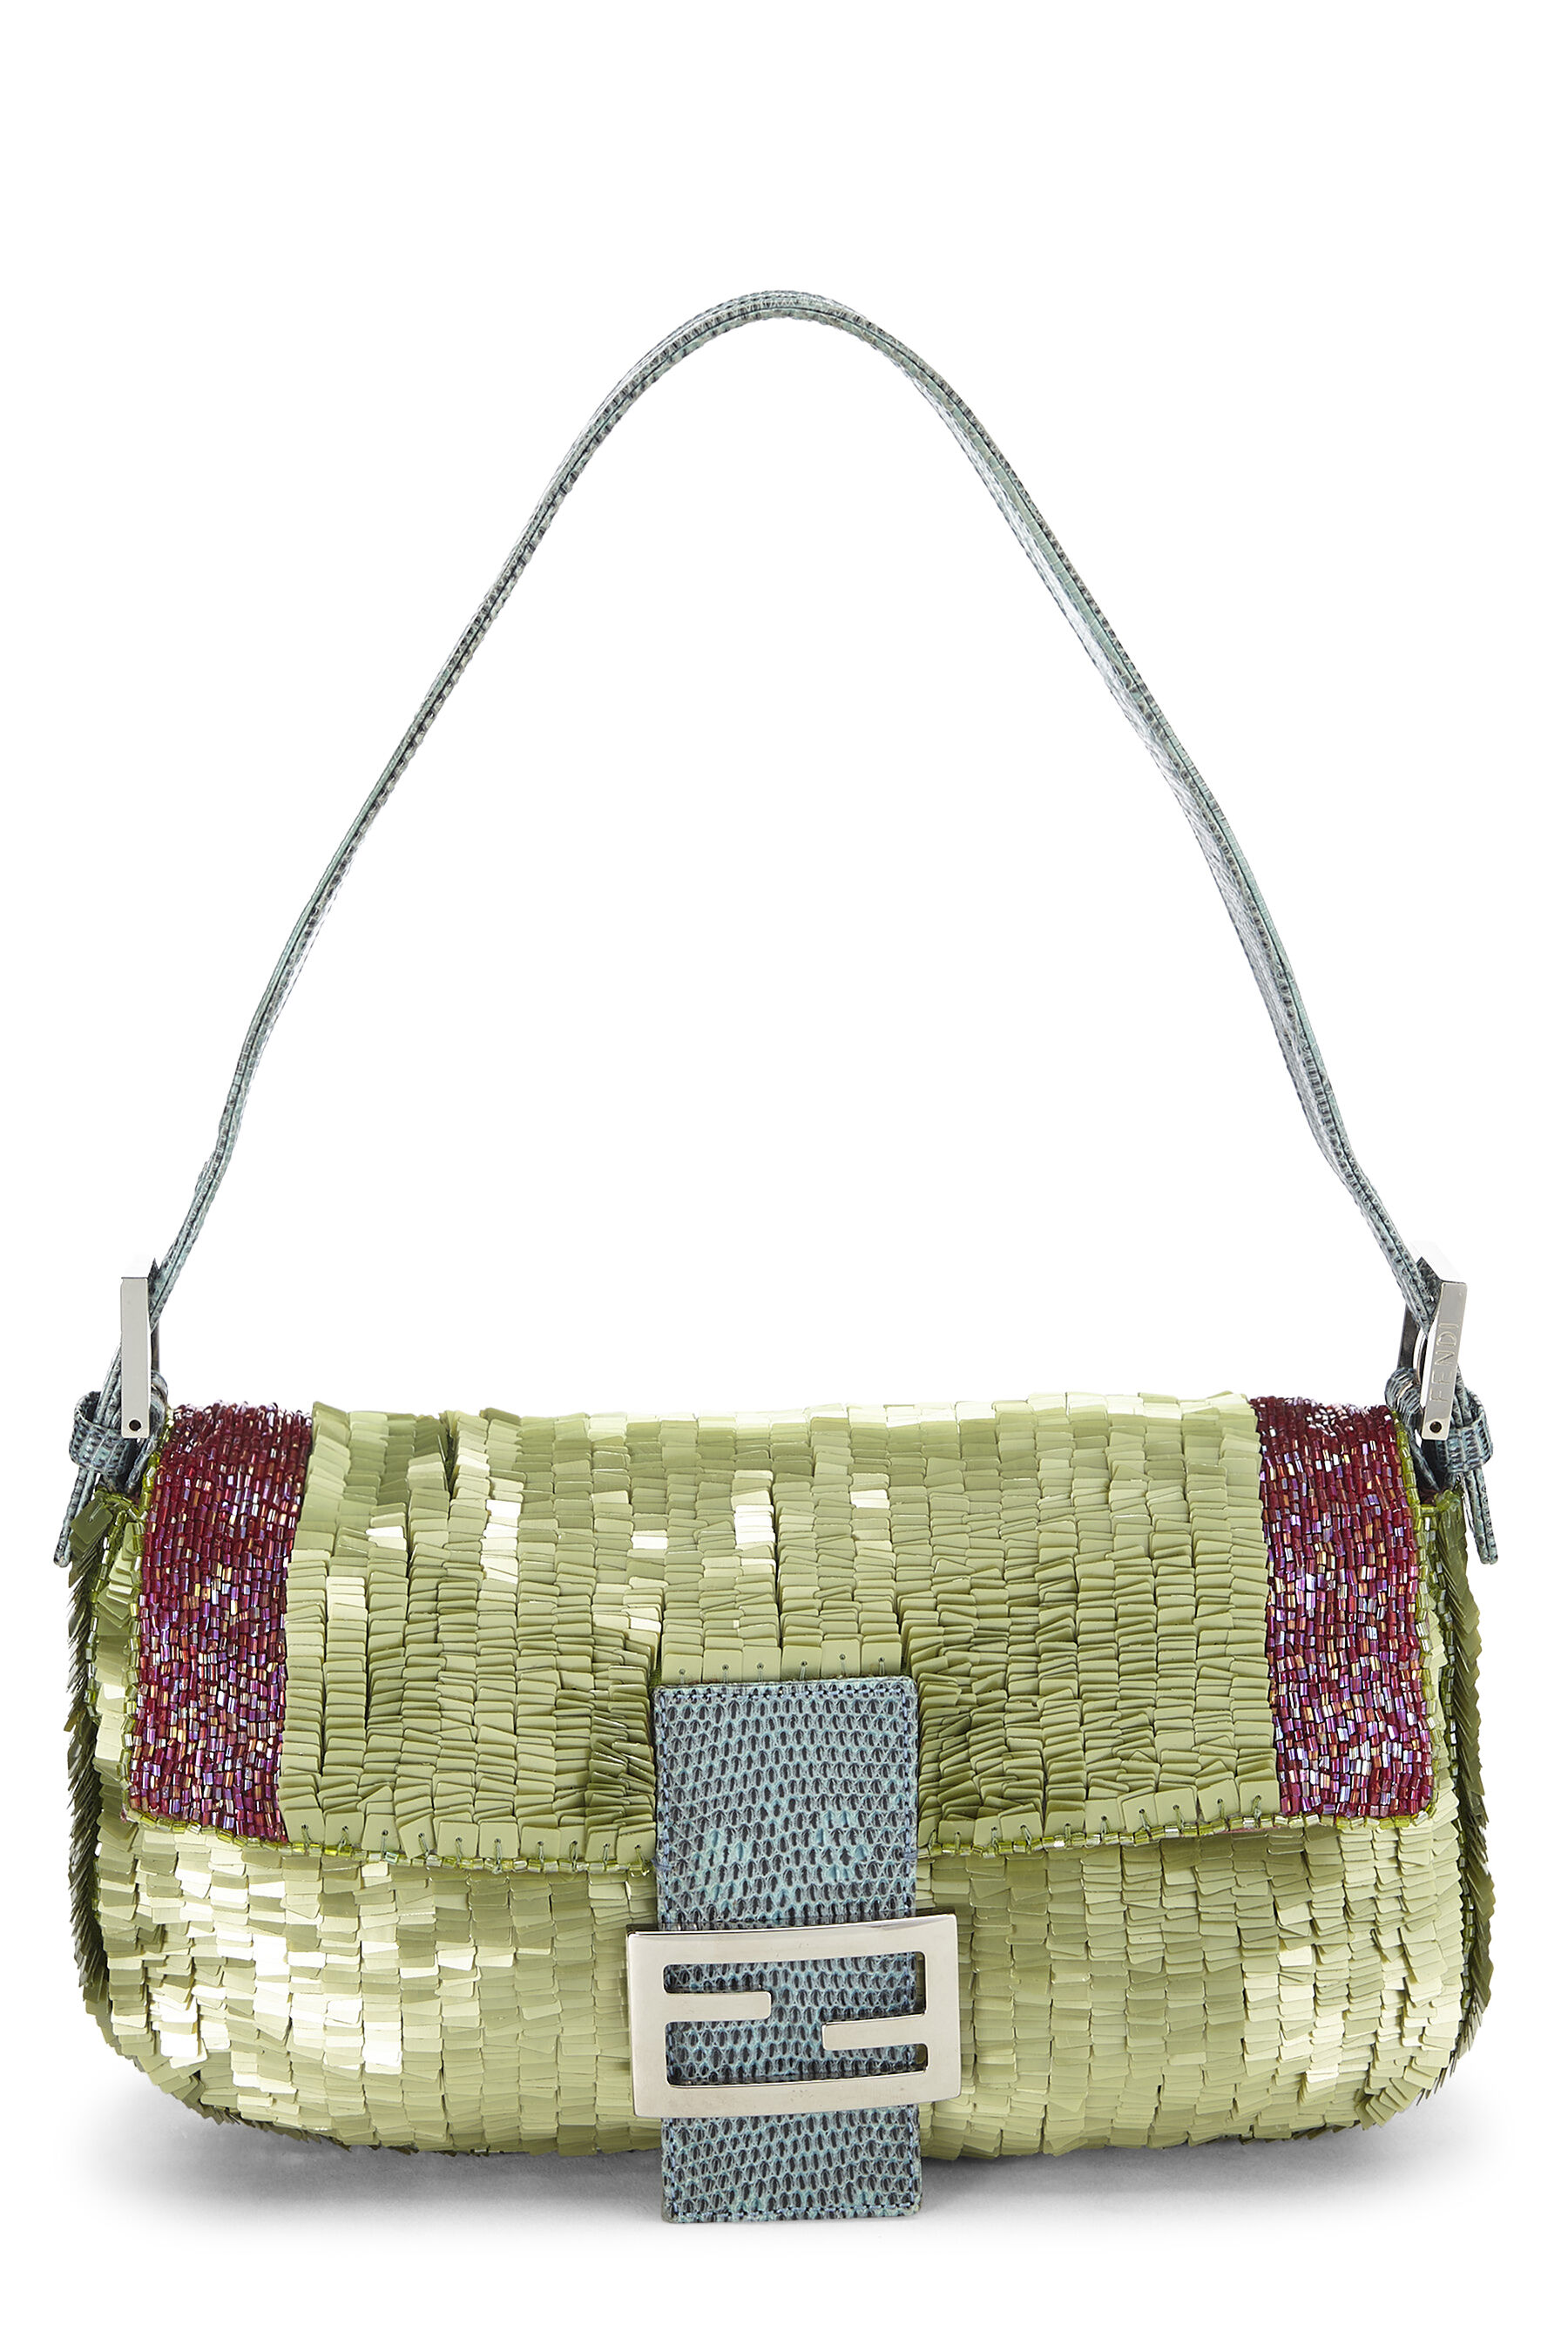 Mini Sequined Square Crossbody Bag, Butterfly Decor Flap Purse